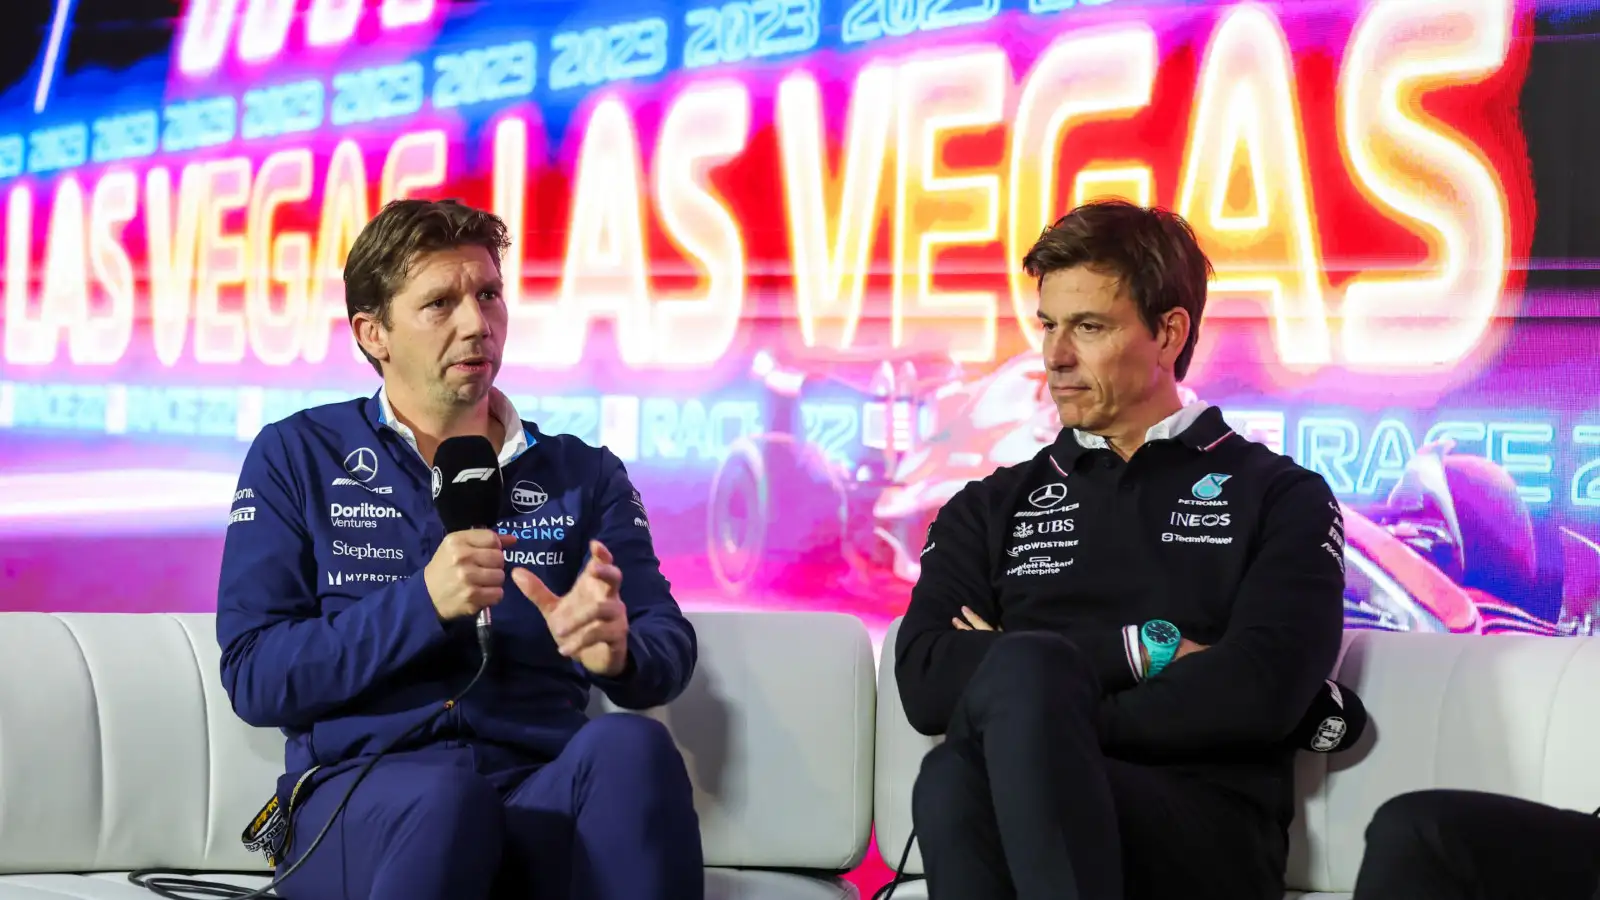 James Vowles, Toto Wolff at the press conference at the 2023 Las Vegas Grand Prix.